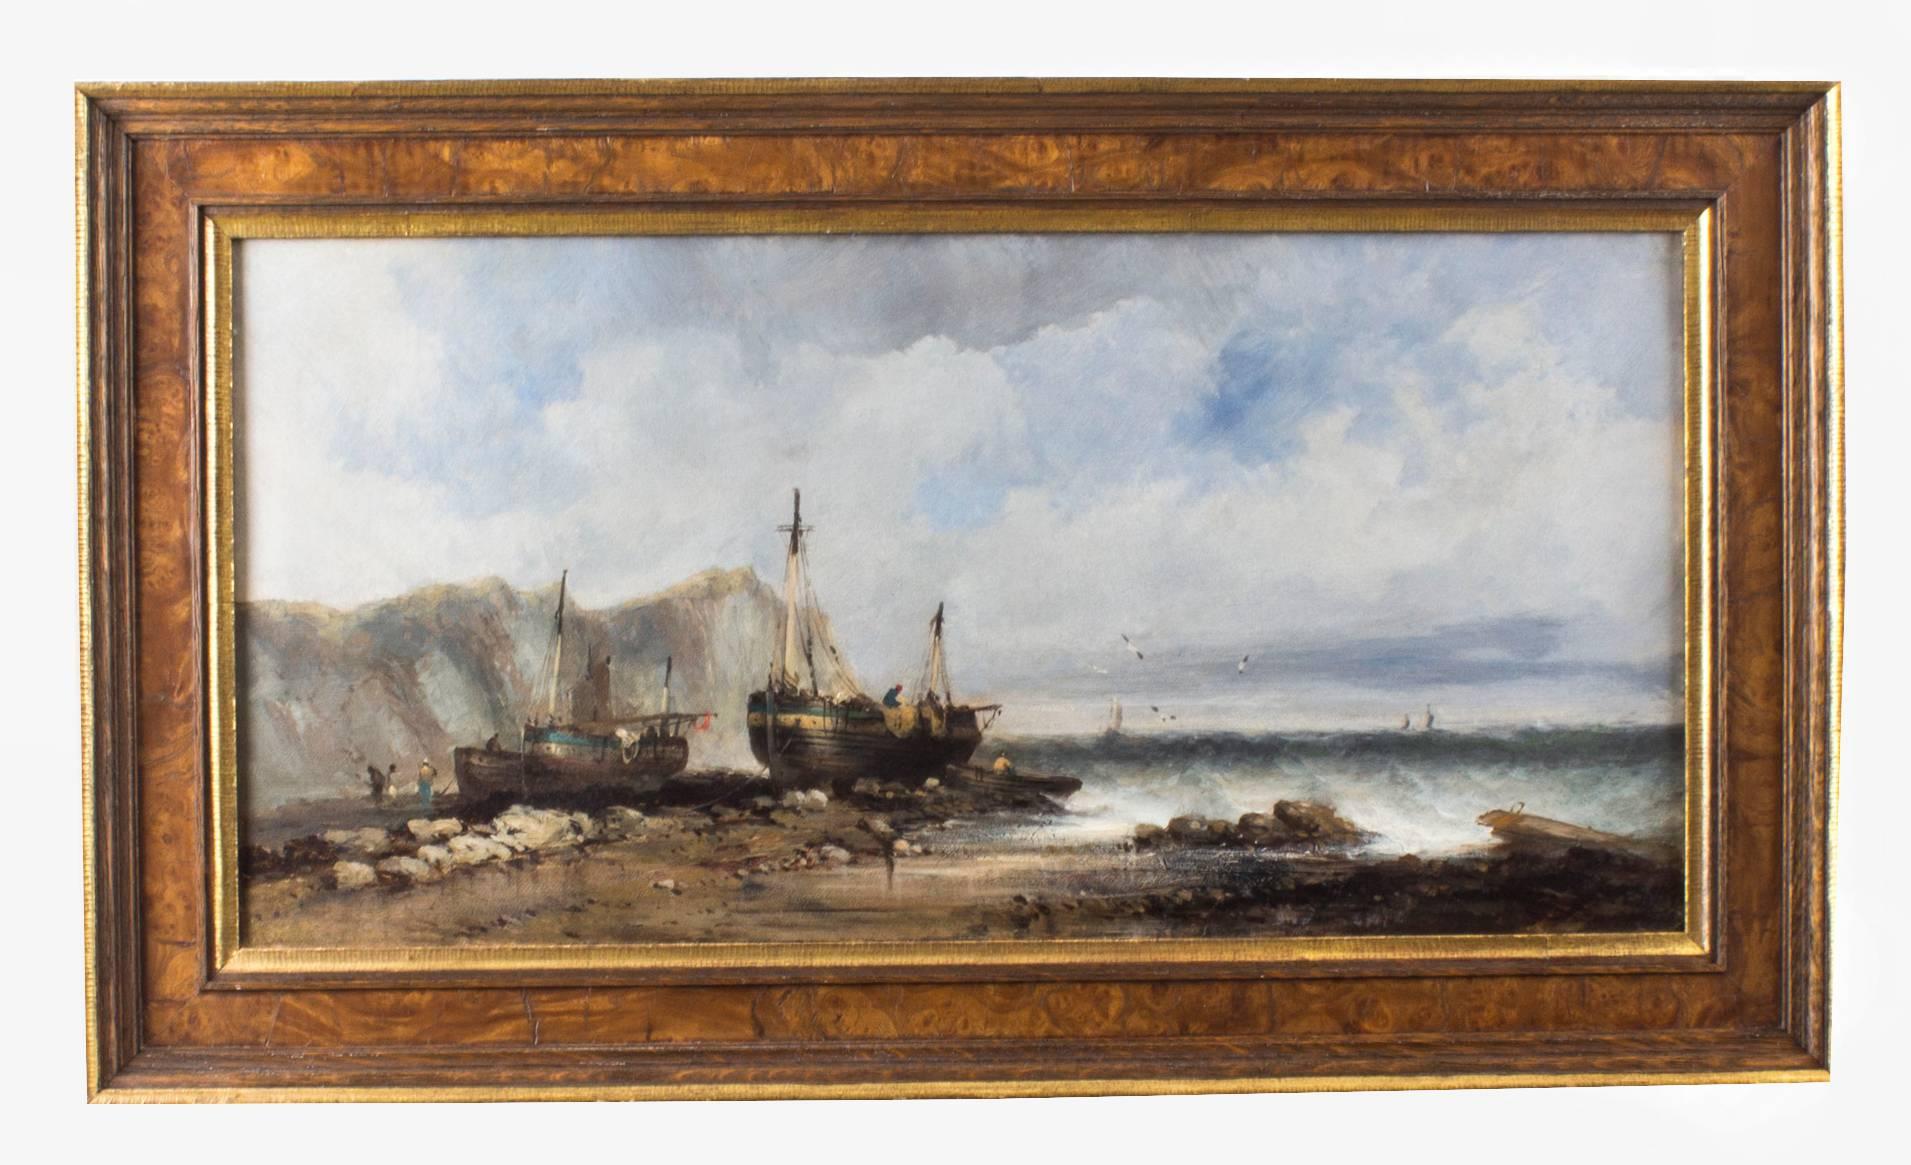 Antique Pair of Seascape Oil Paintings Fishing Boats, 19th Century In Excellent Condition For Sale In London, GB